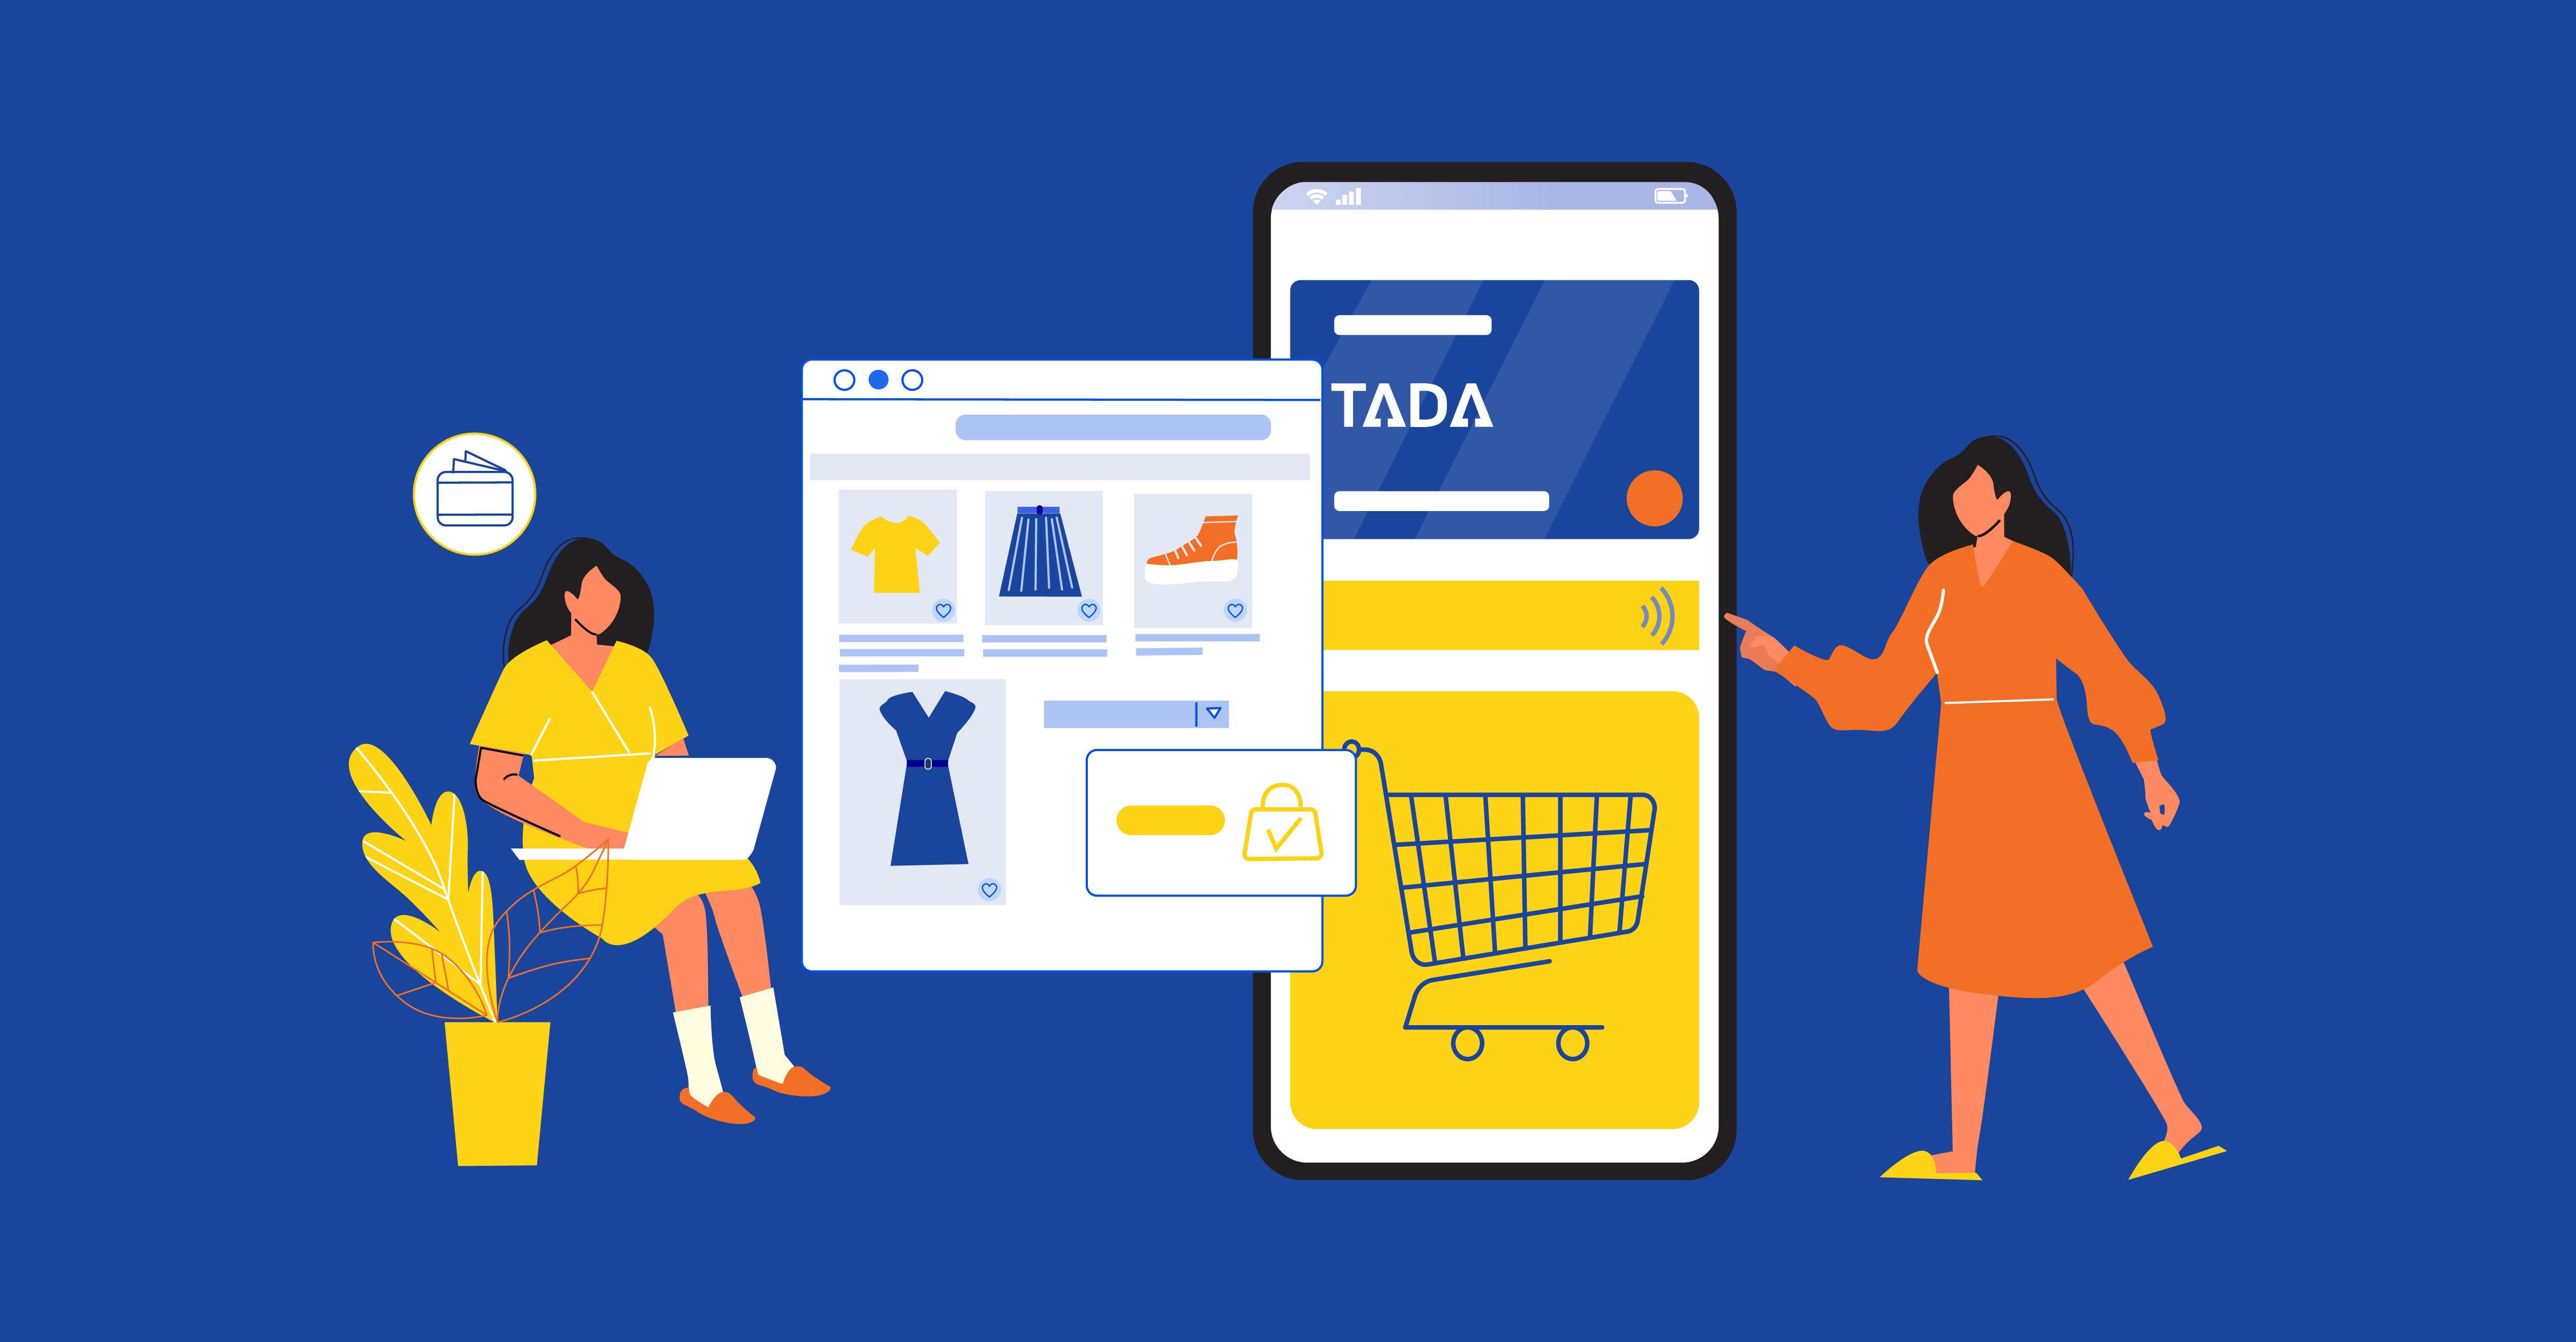 Enjoy the Benefits of TADA Wallet for Your End-of-Month Discount!